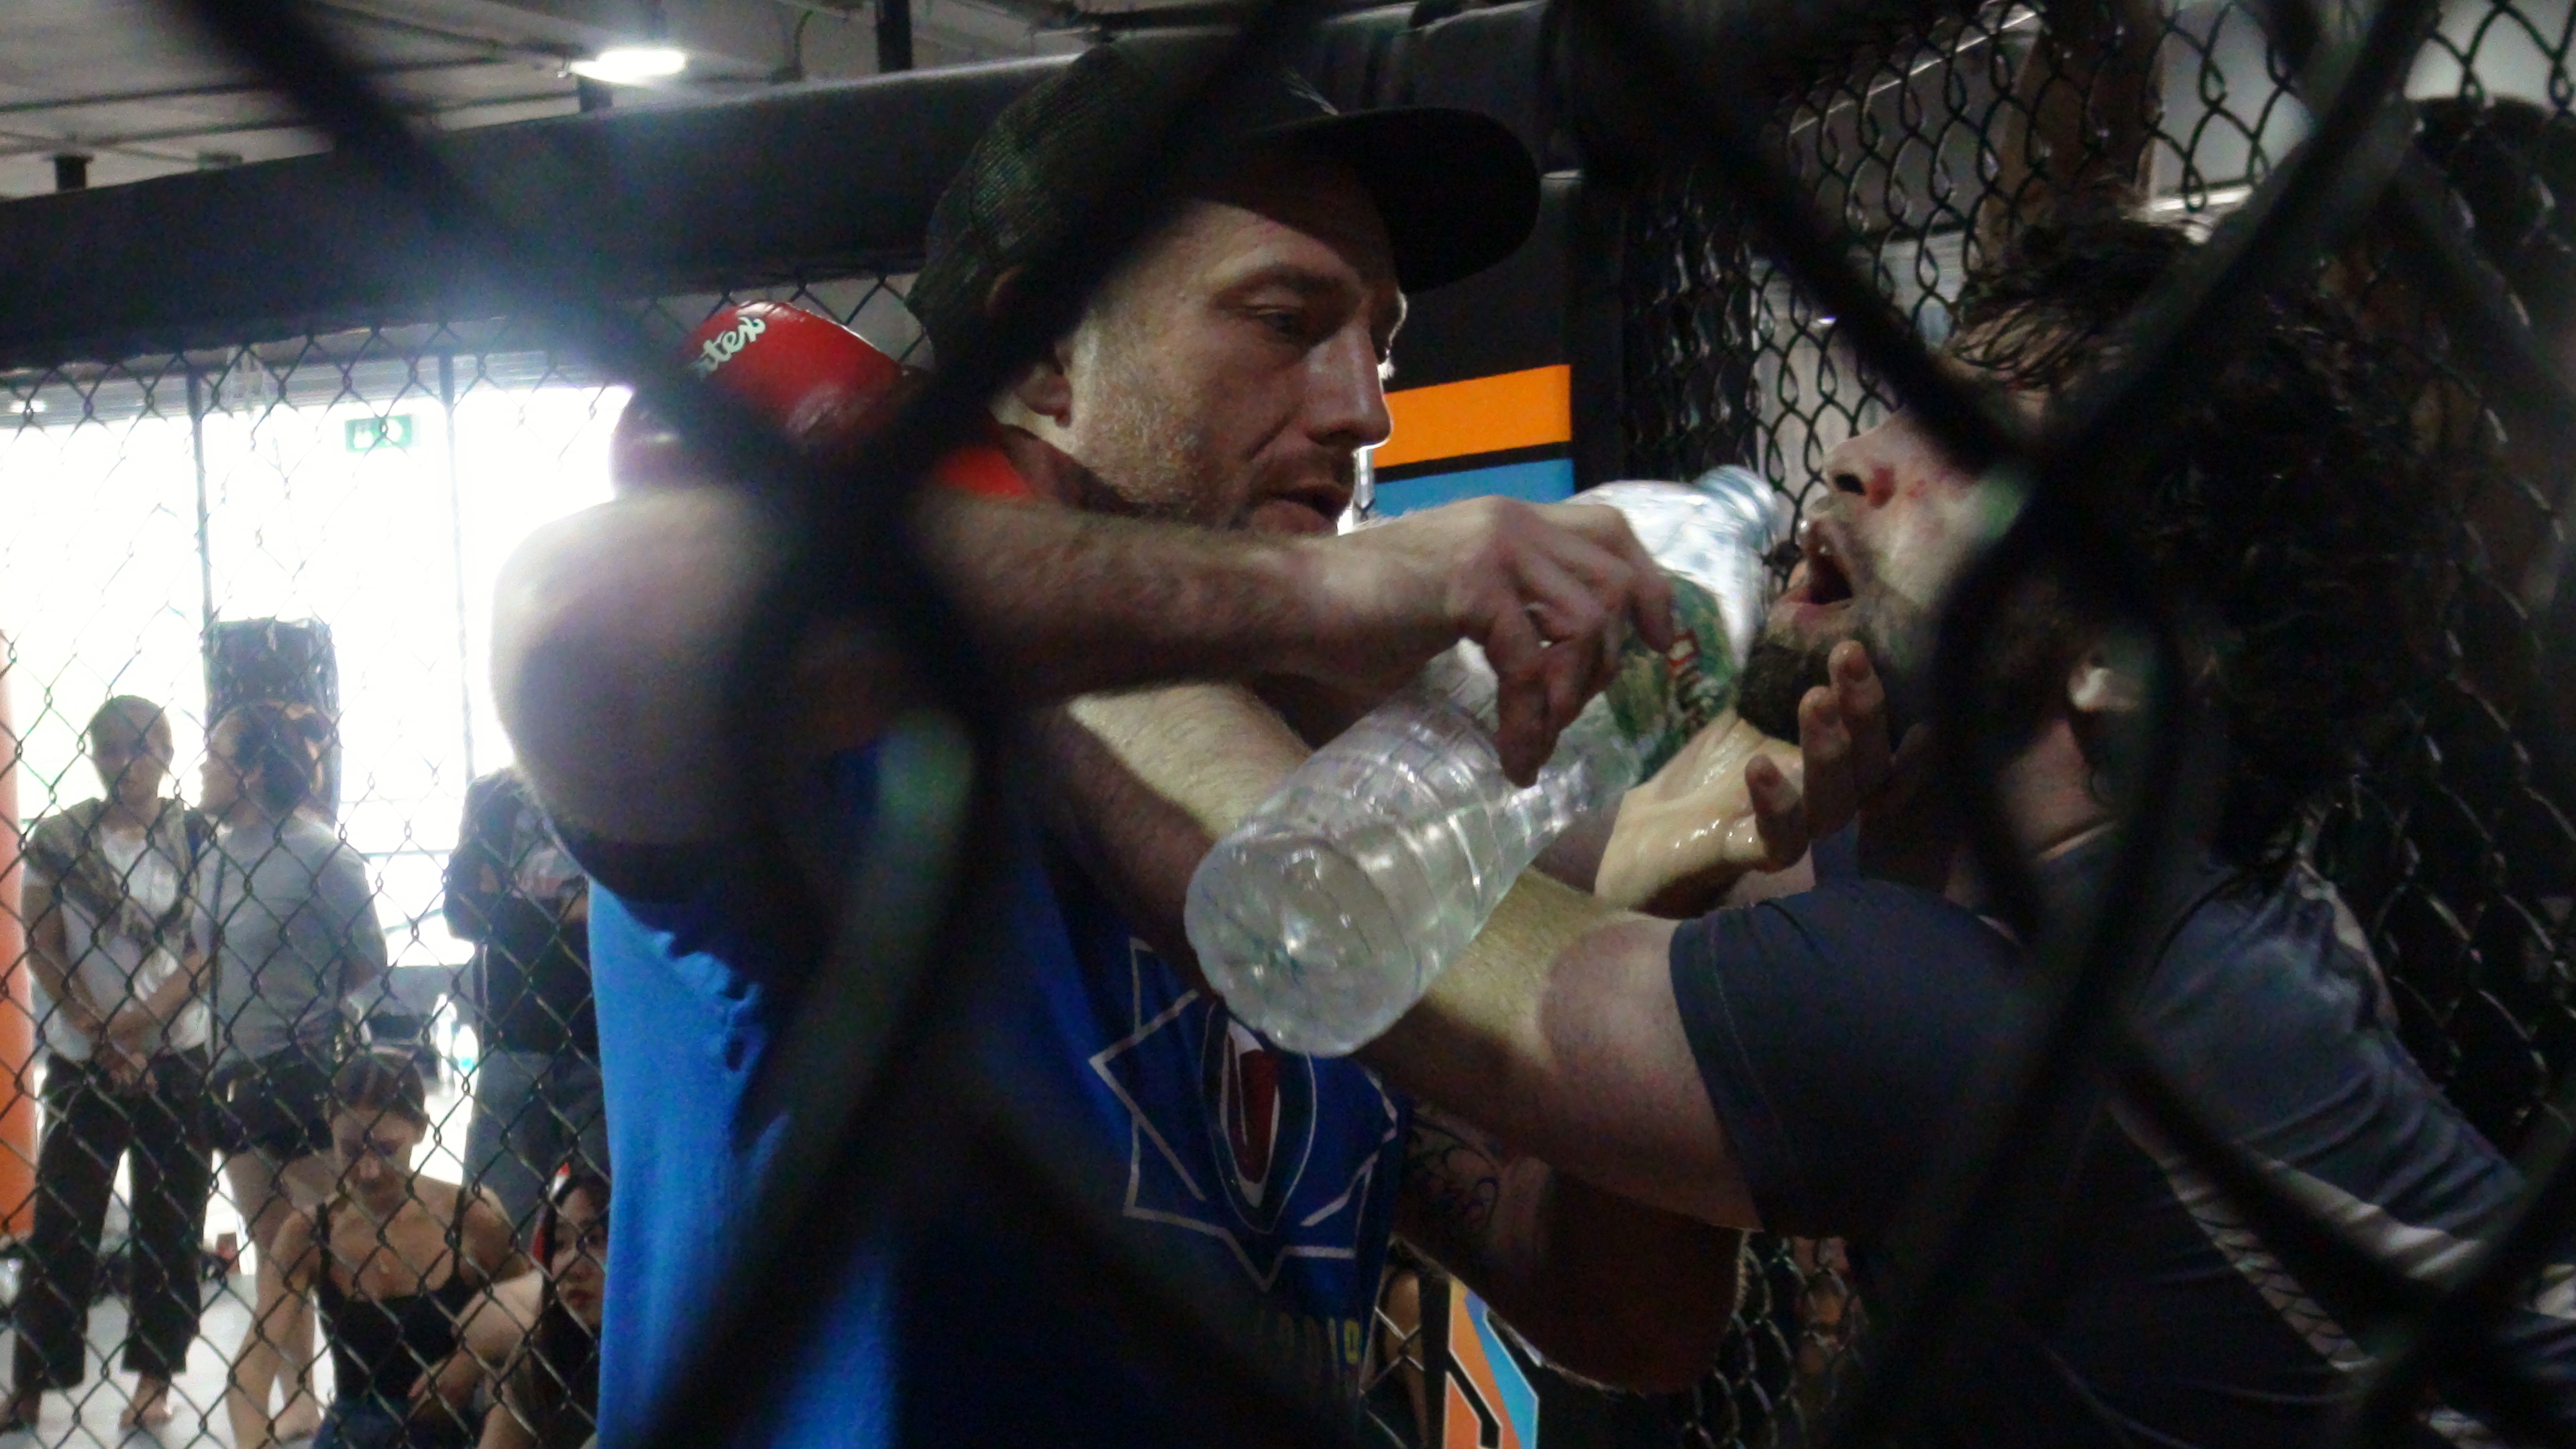 Coach giving water to a MMA cage fighter between rounds